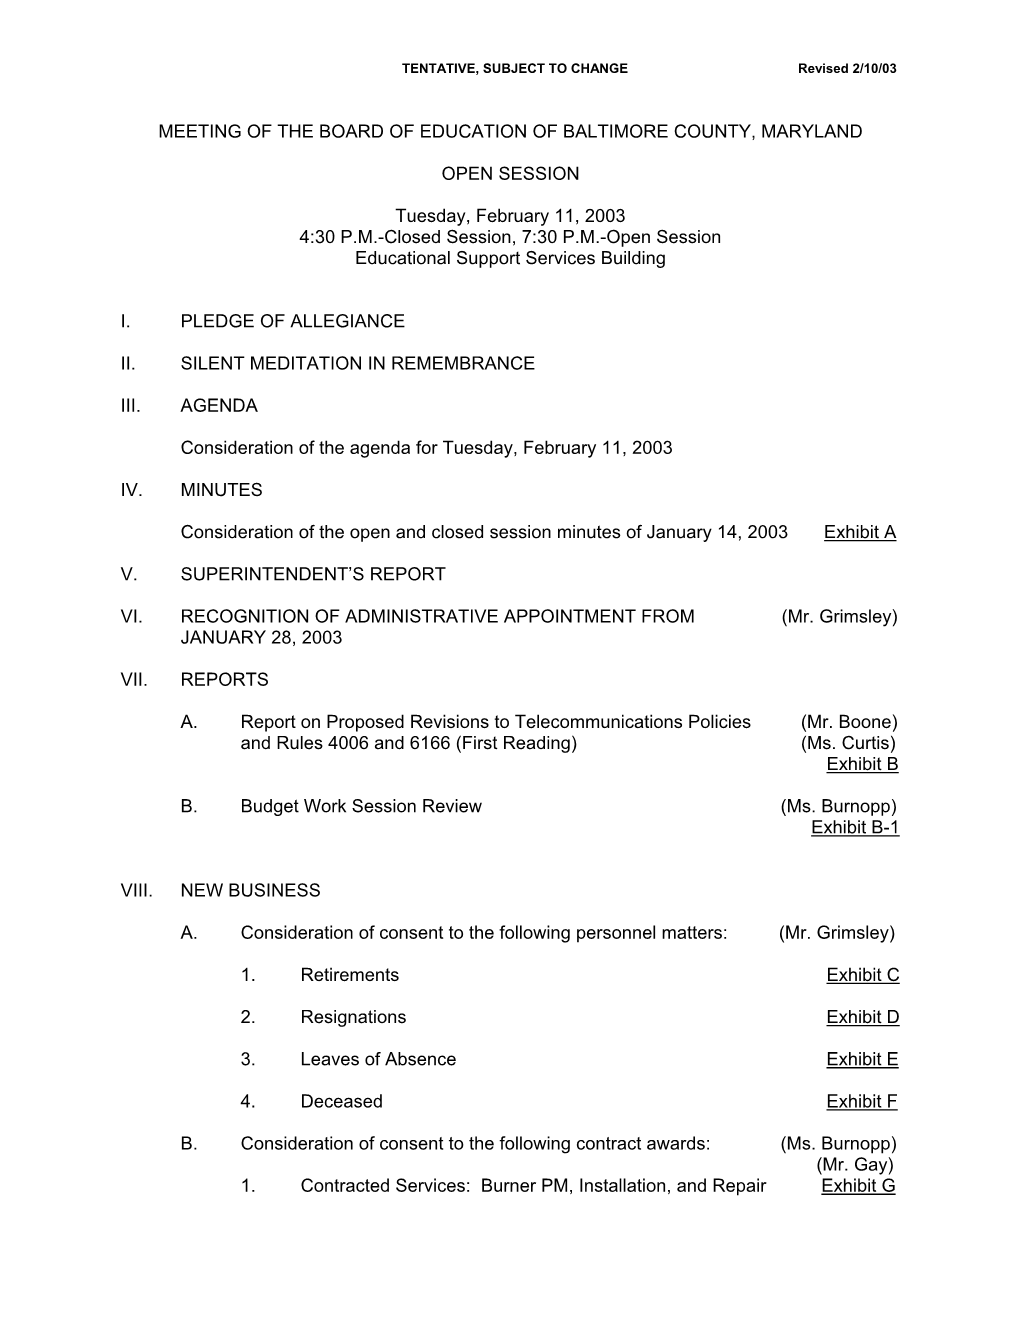 Board of Education Meeting Agenda for February 11, 2003